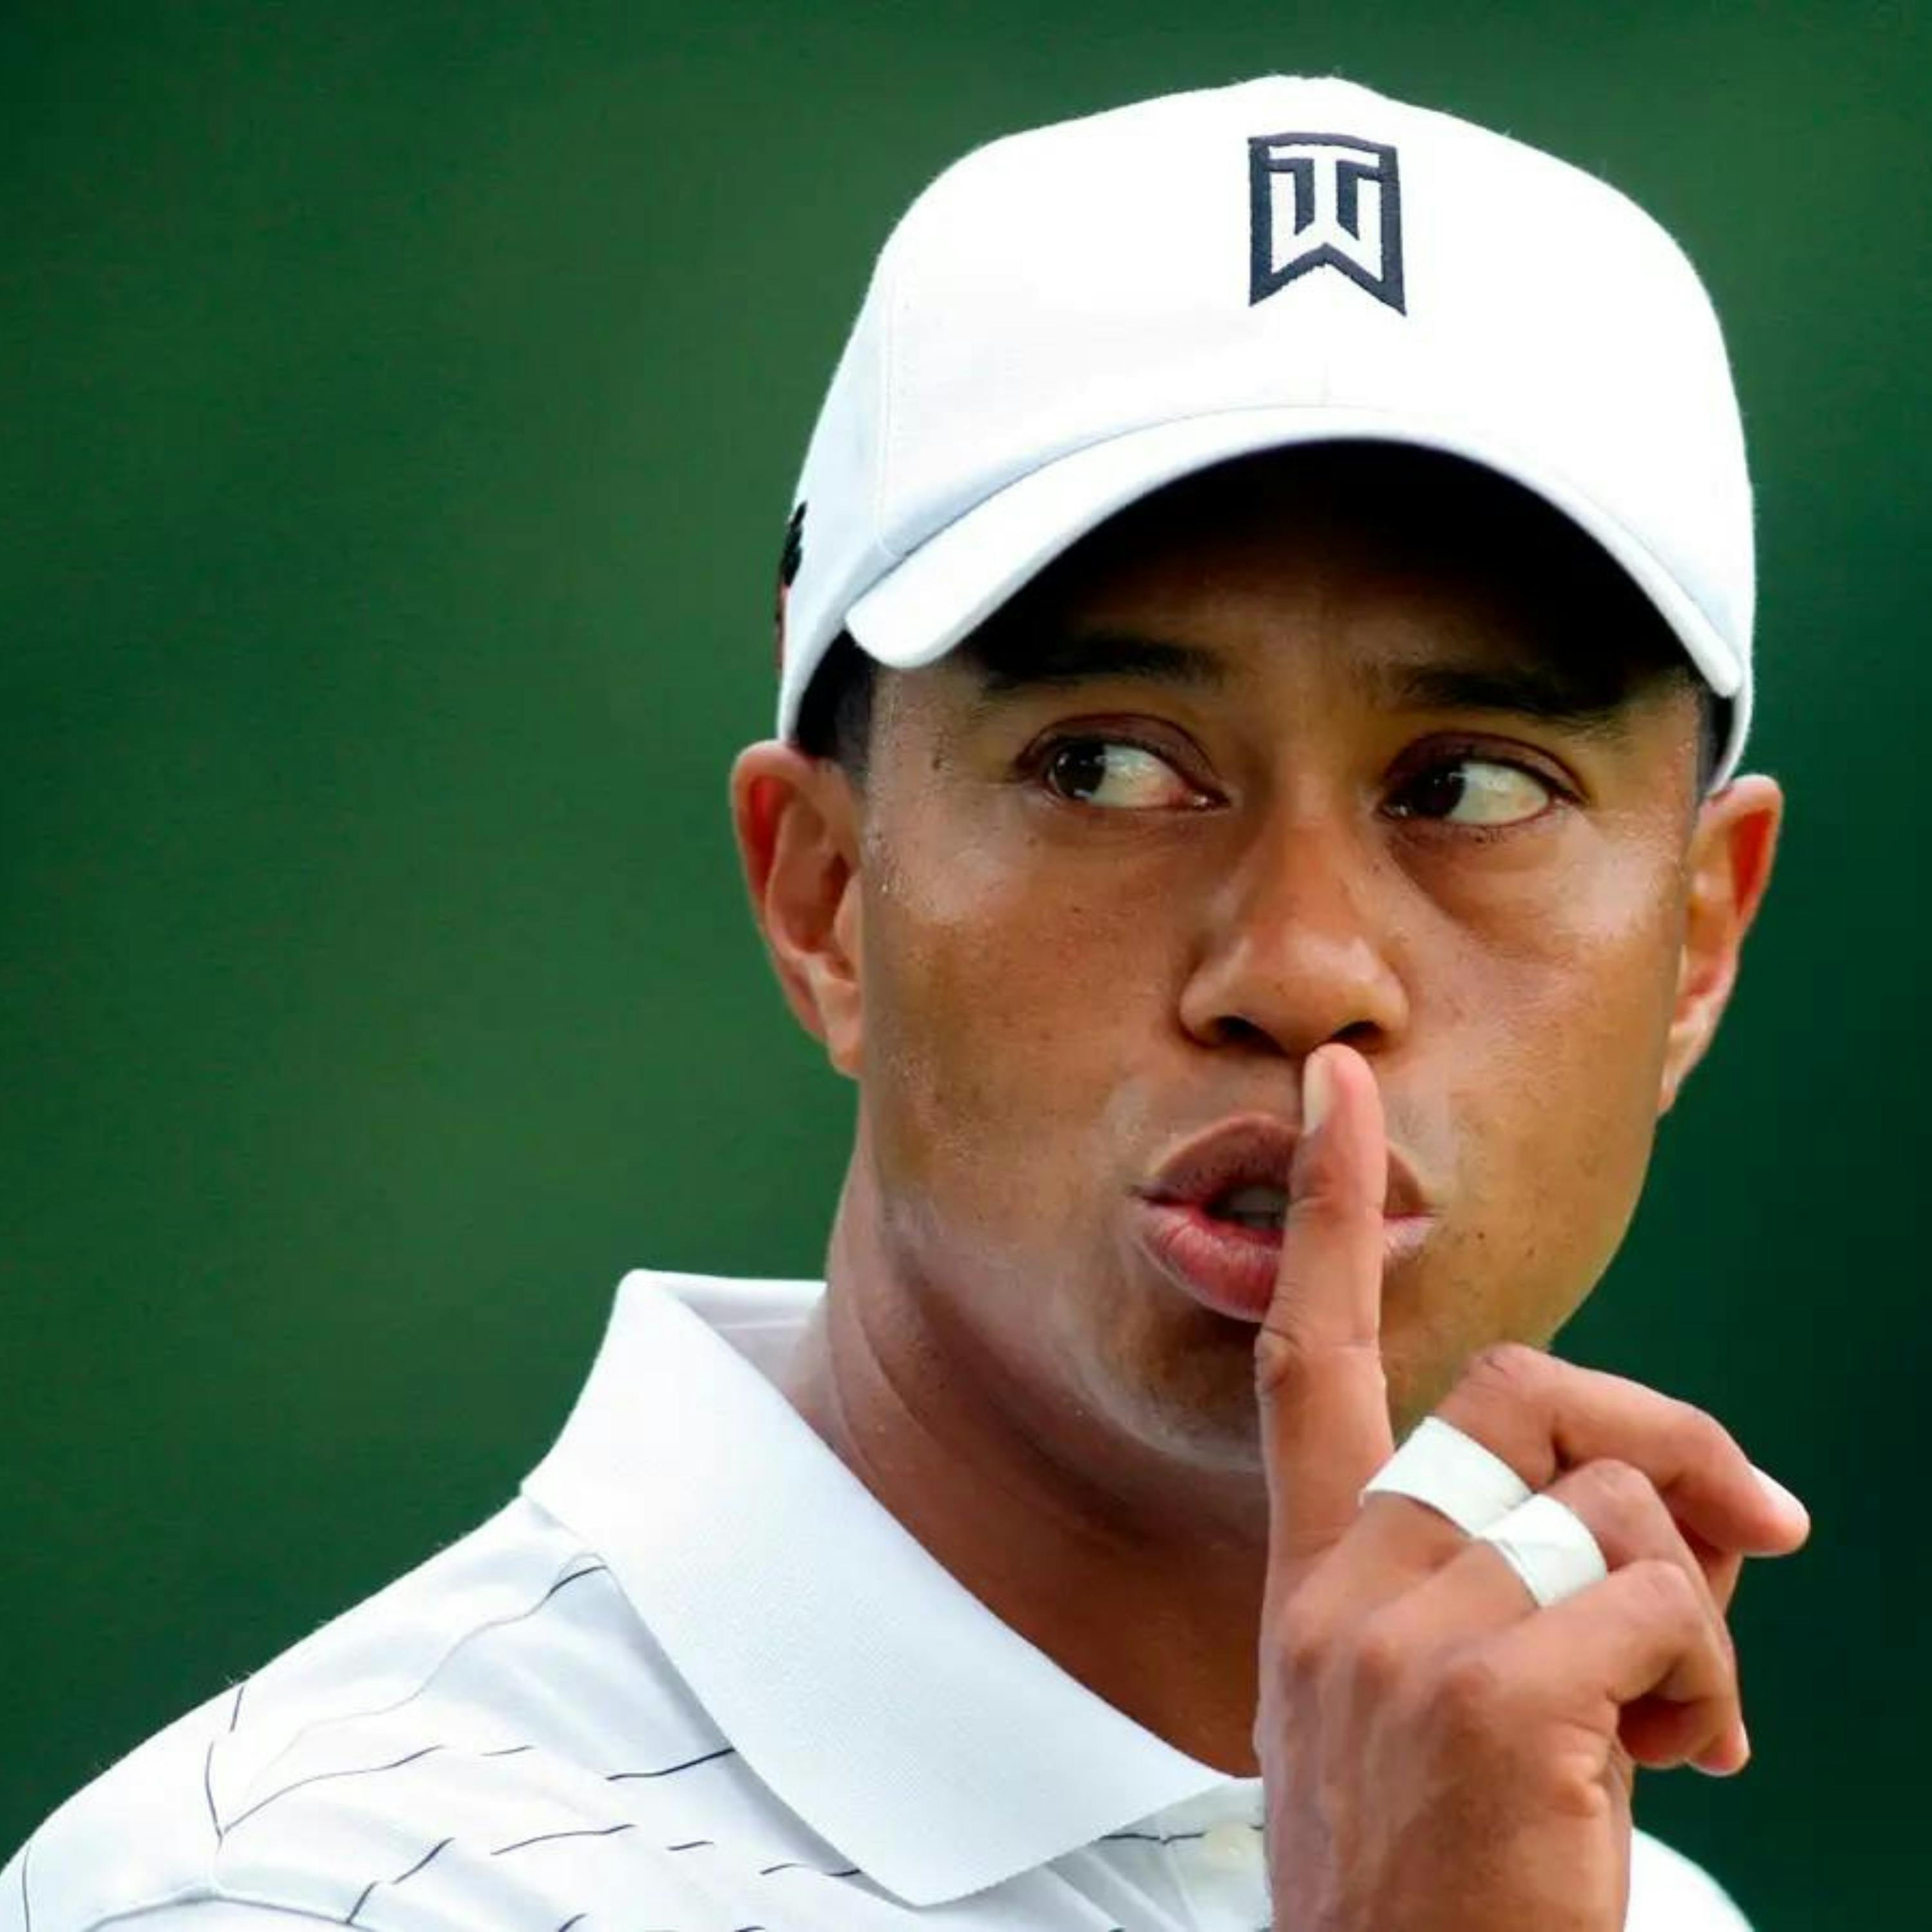 Tiger Woods: Get in the hole!